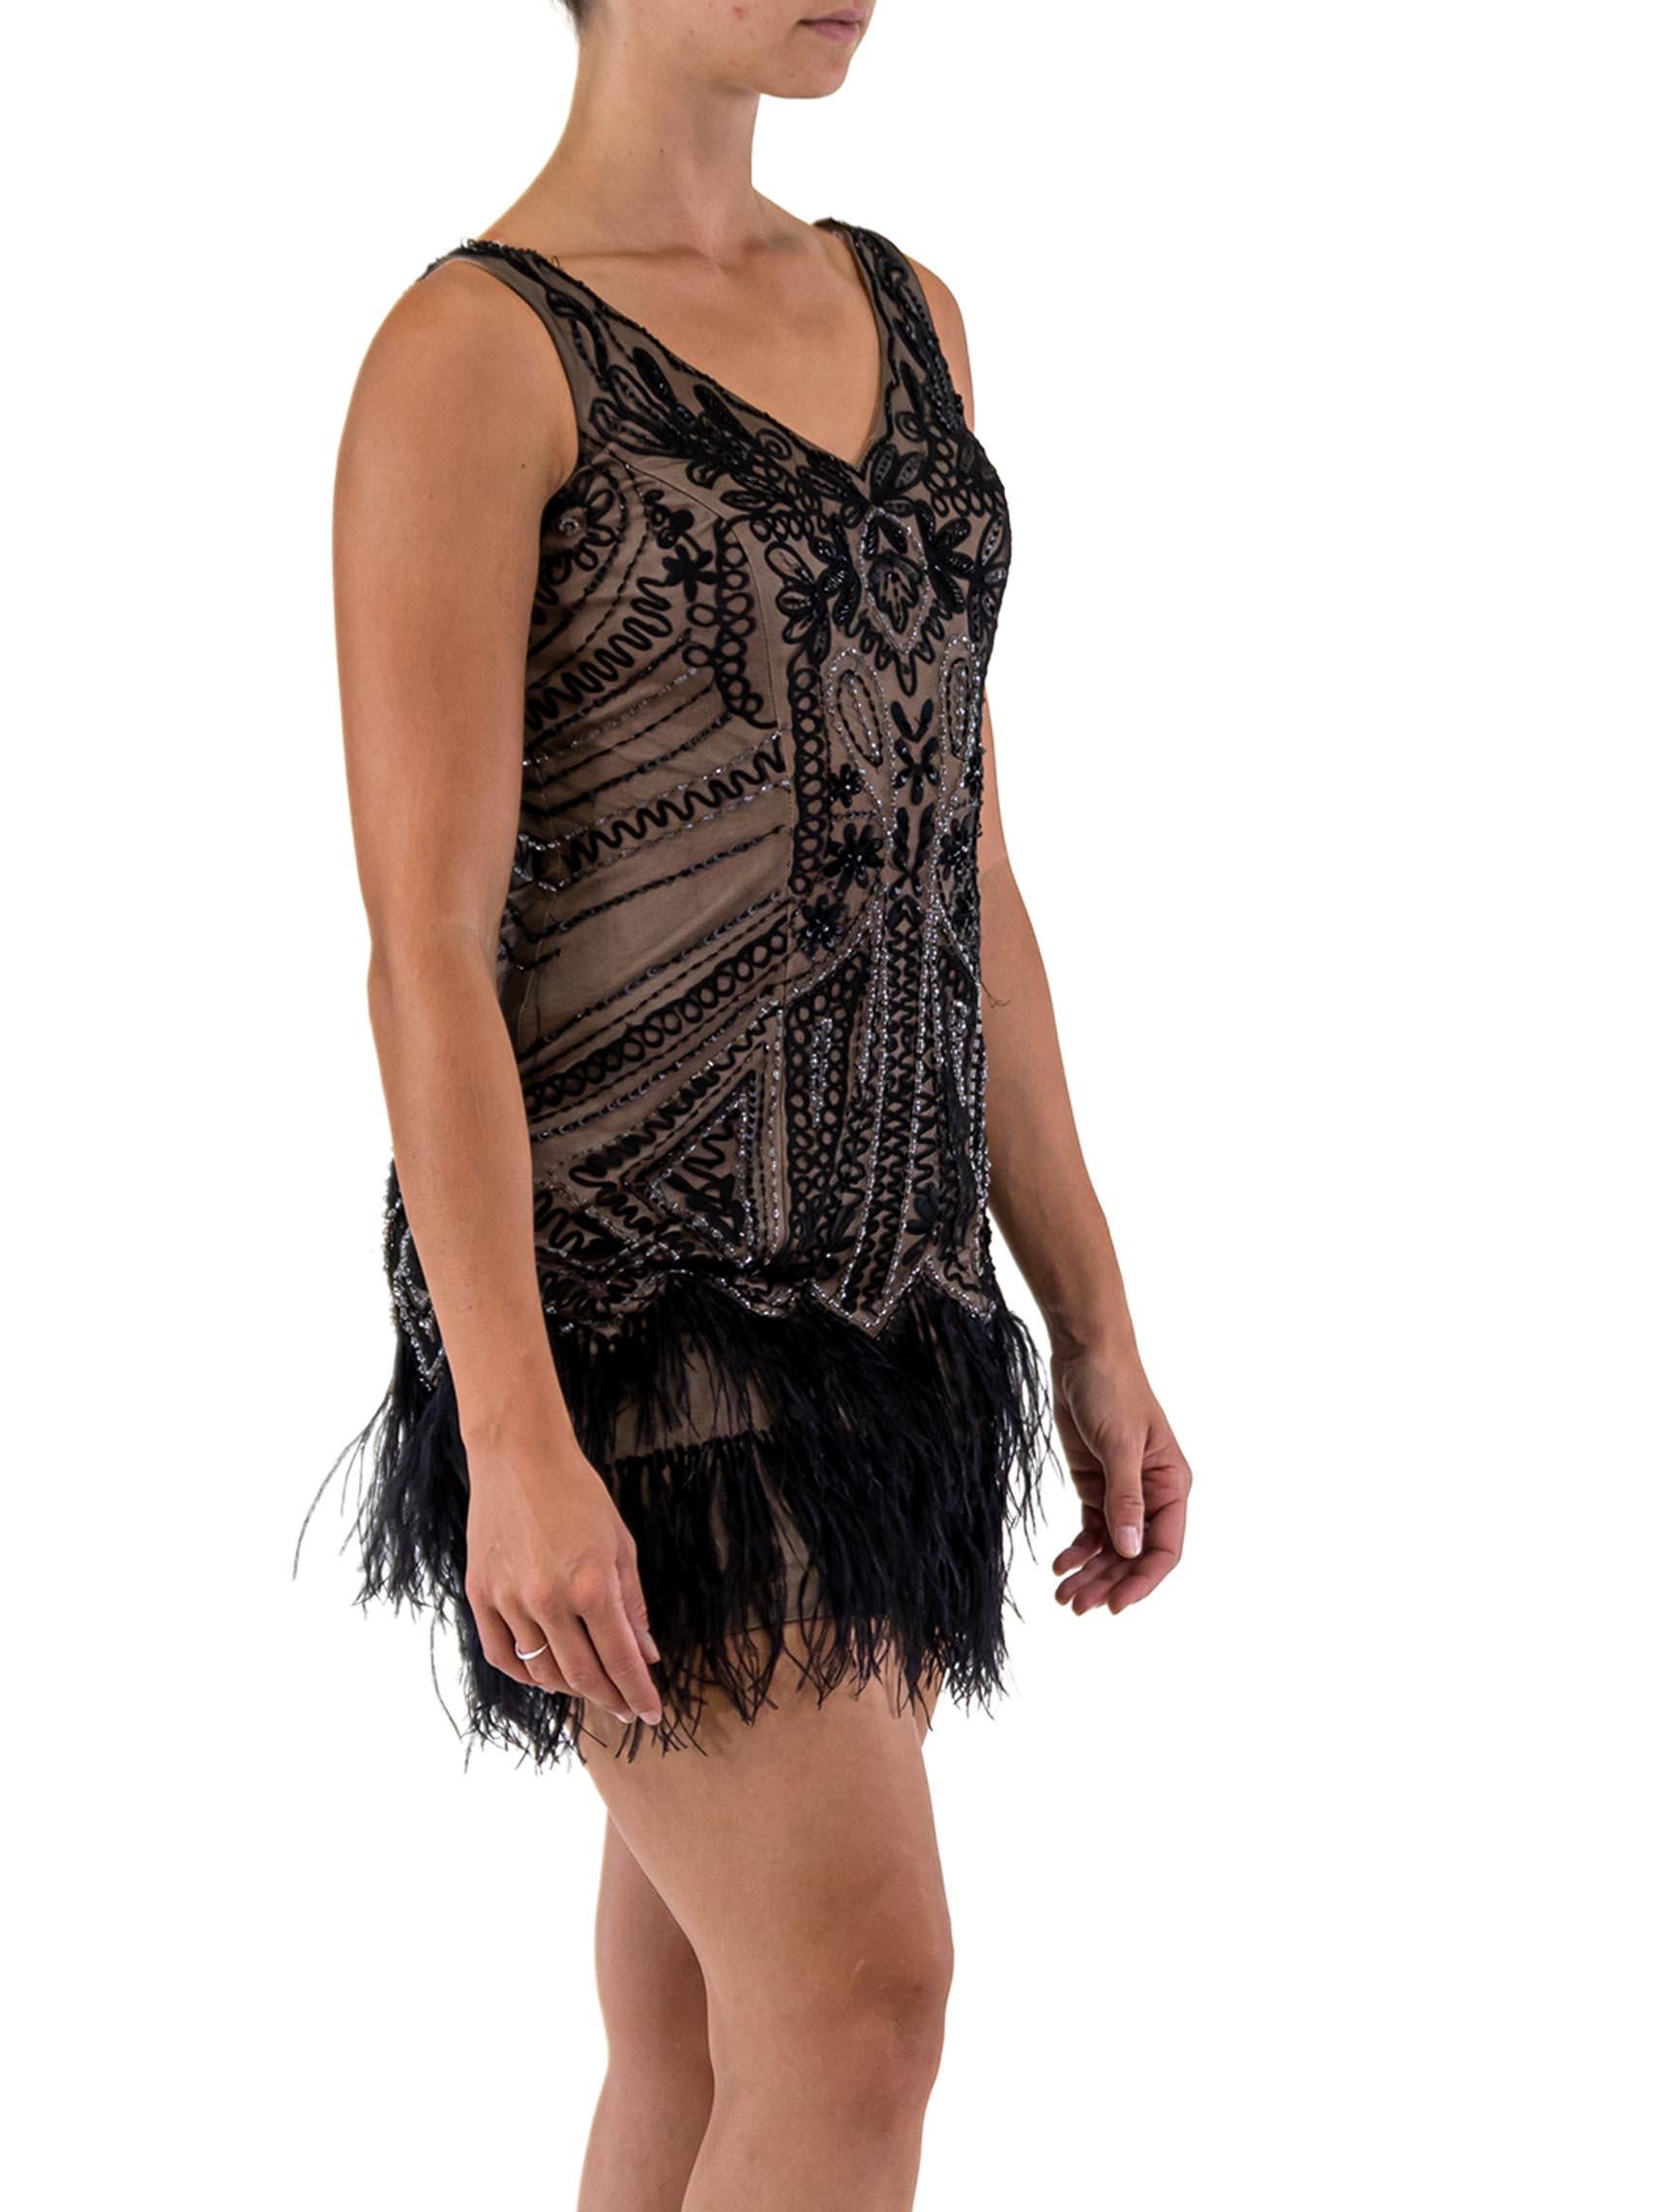 Women's 1990S Beaded Nylon Mesh 20'S Style Cocktail Dress With Ostrich Feather Fringe For Sale